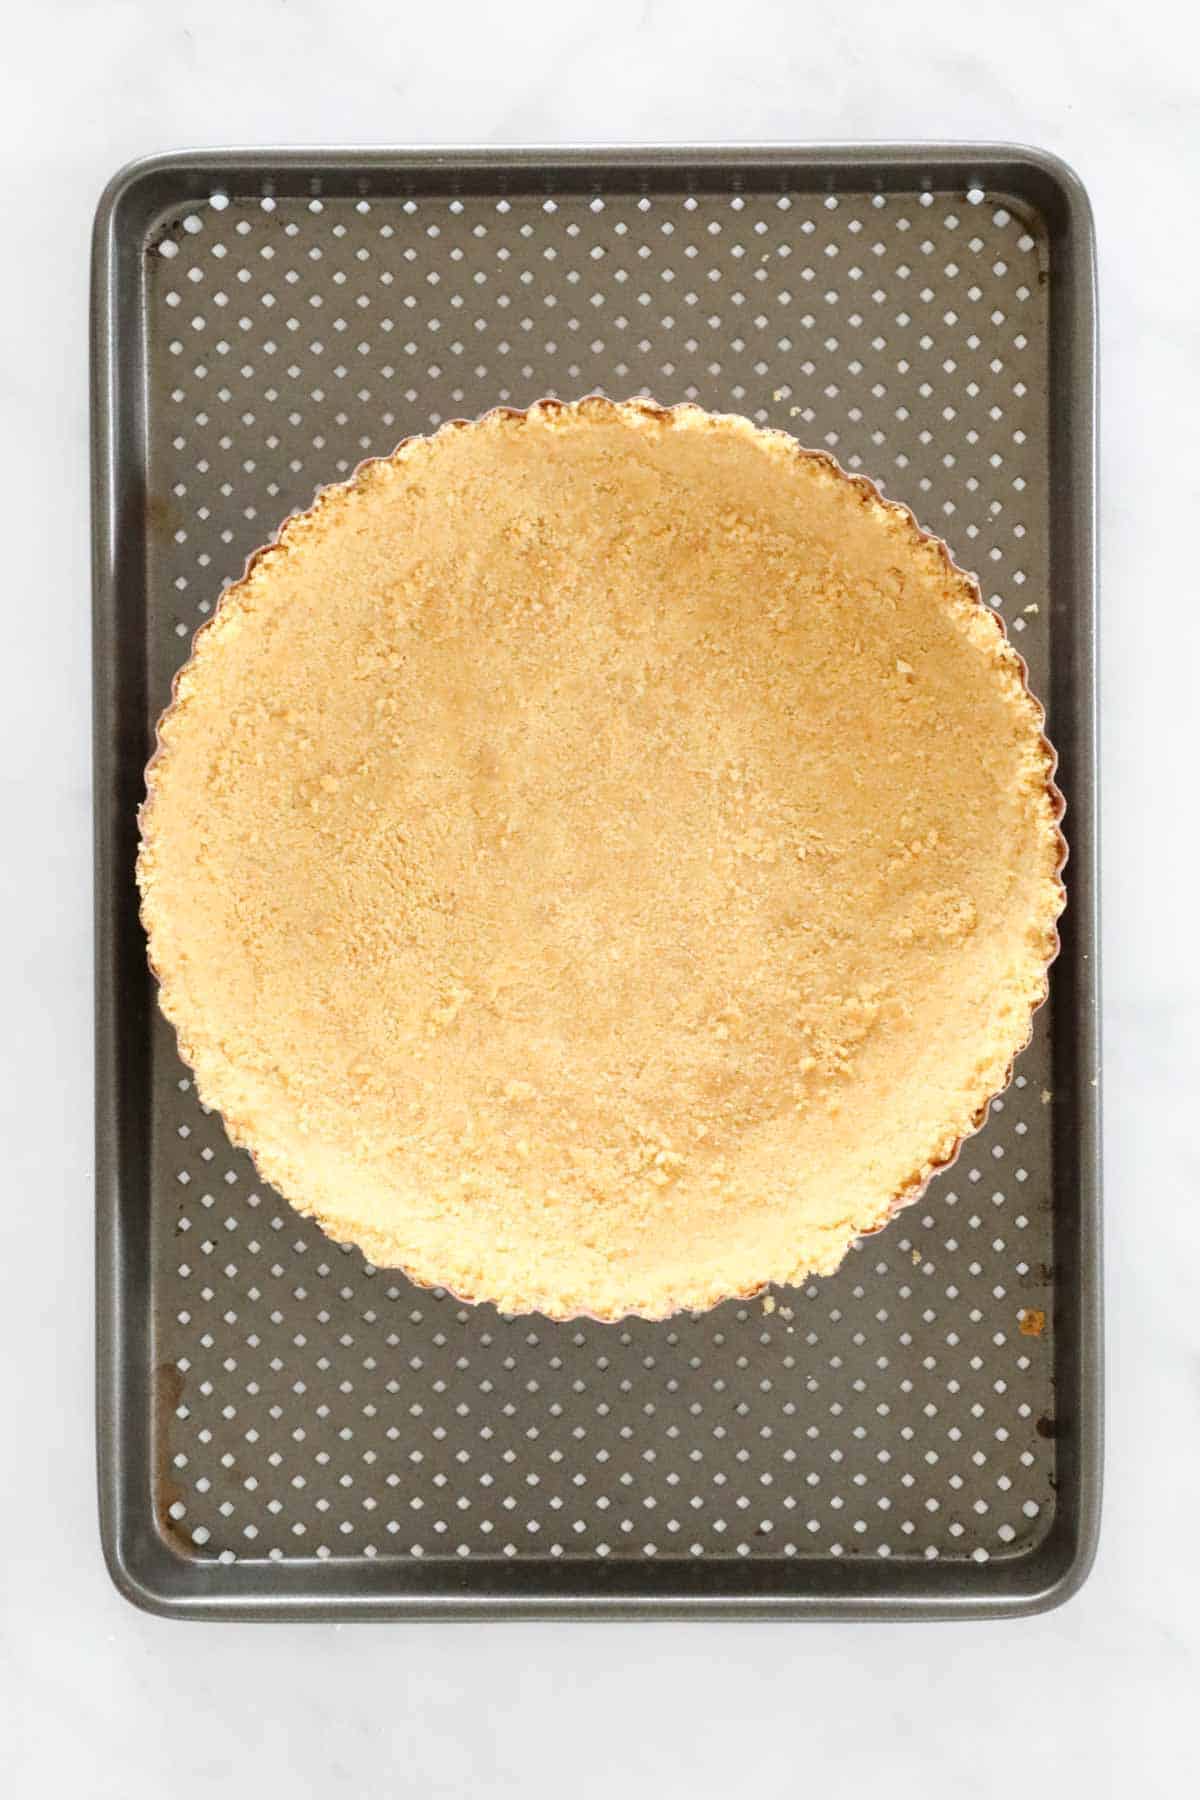 Biscuit crumb base pressed into a tart tin.